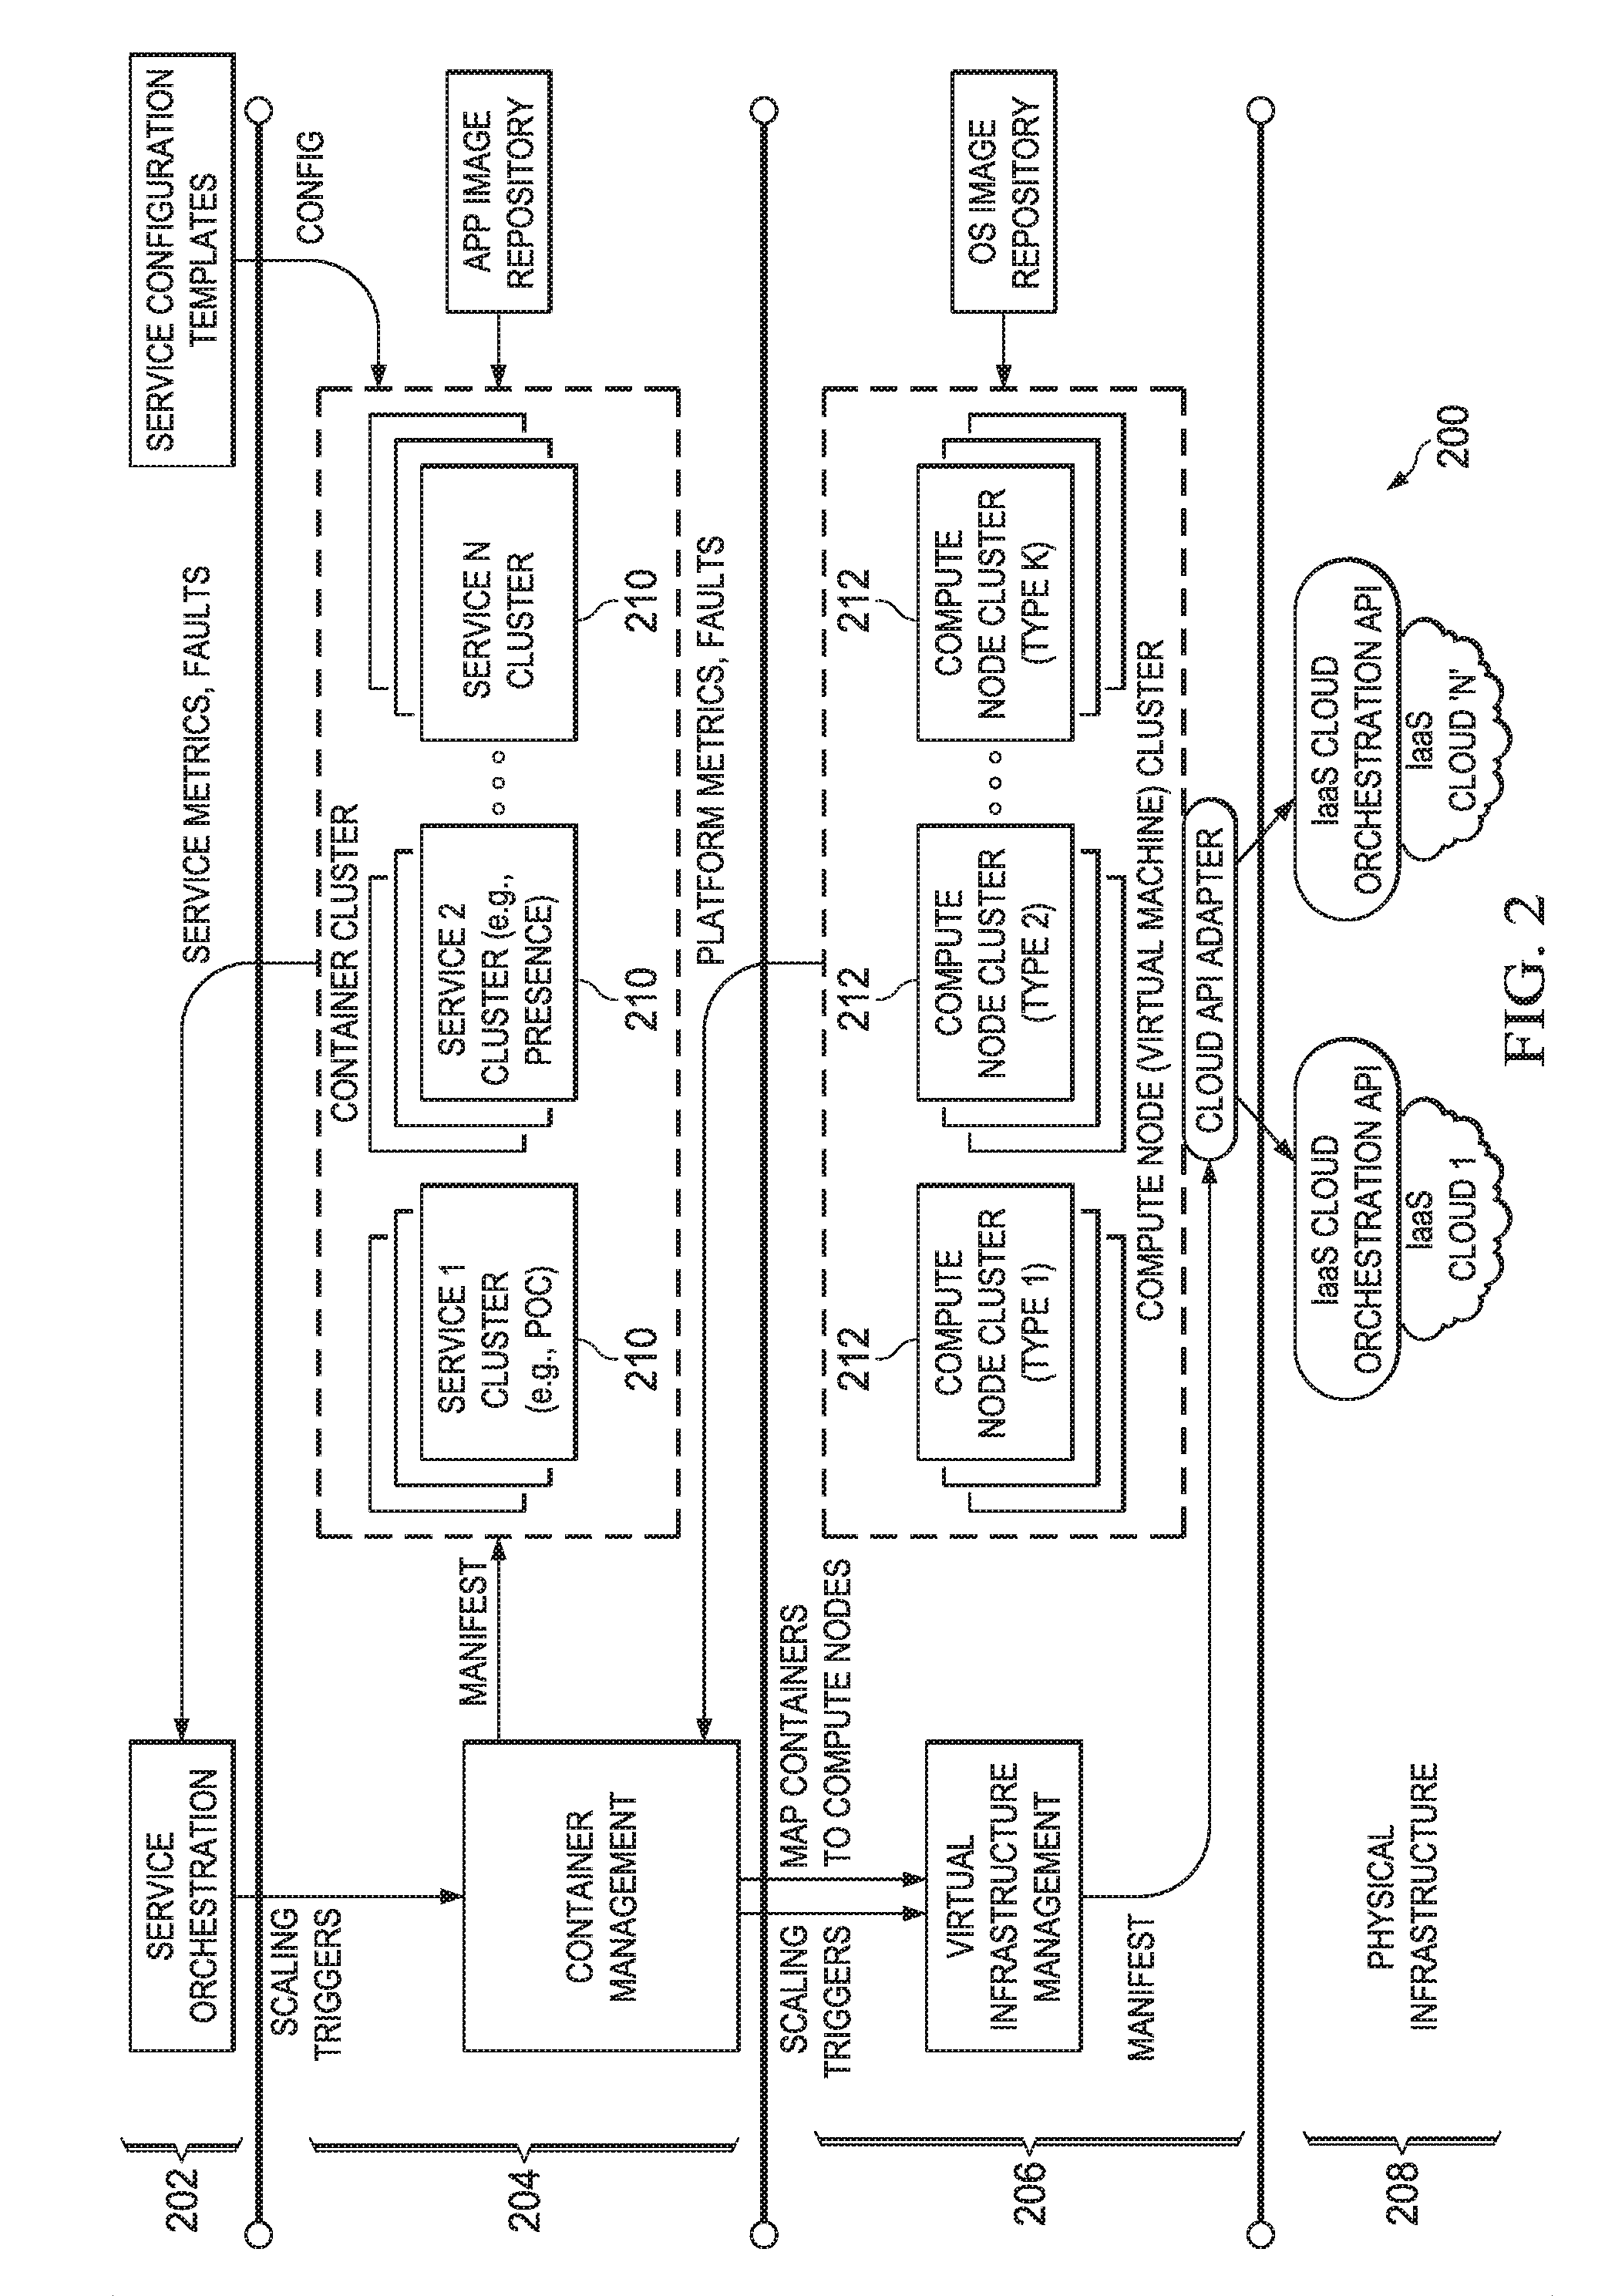 System and Method for Elastic Scaling in a Push to Talk (PTT) Platform using User Affinity Groups